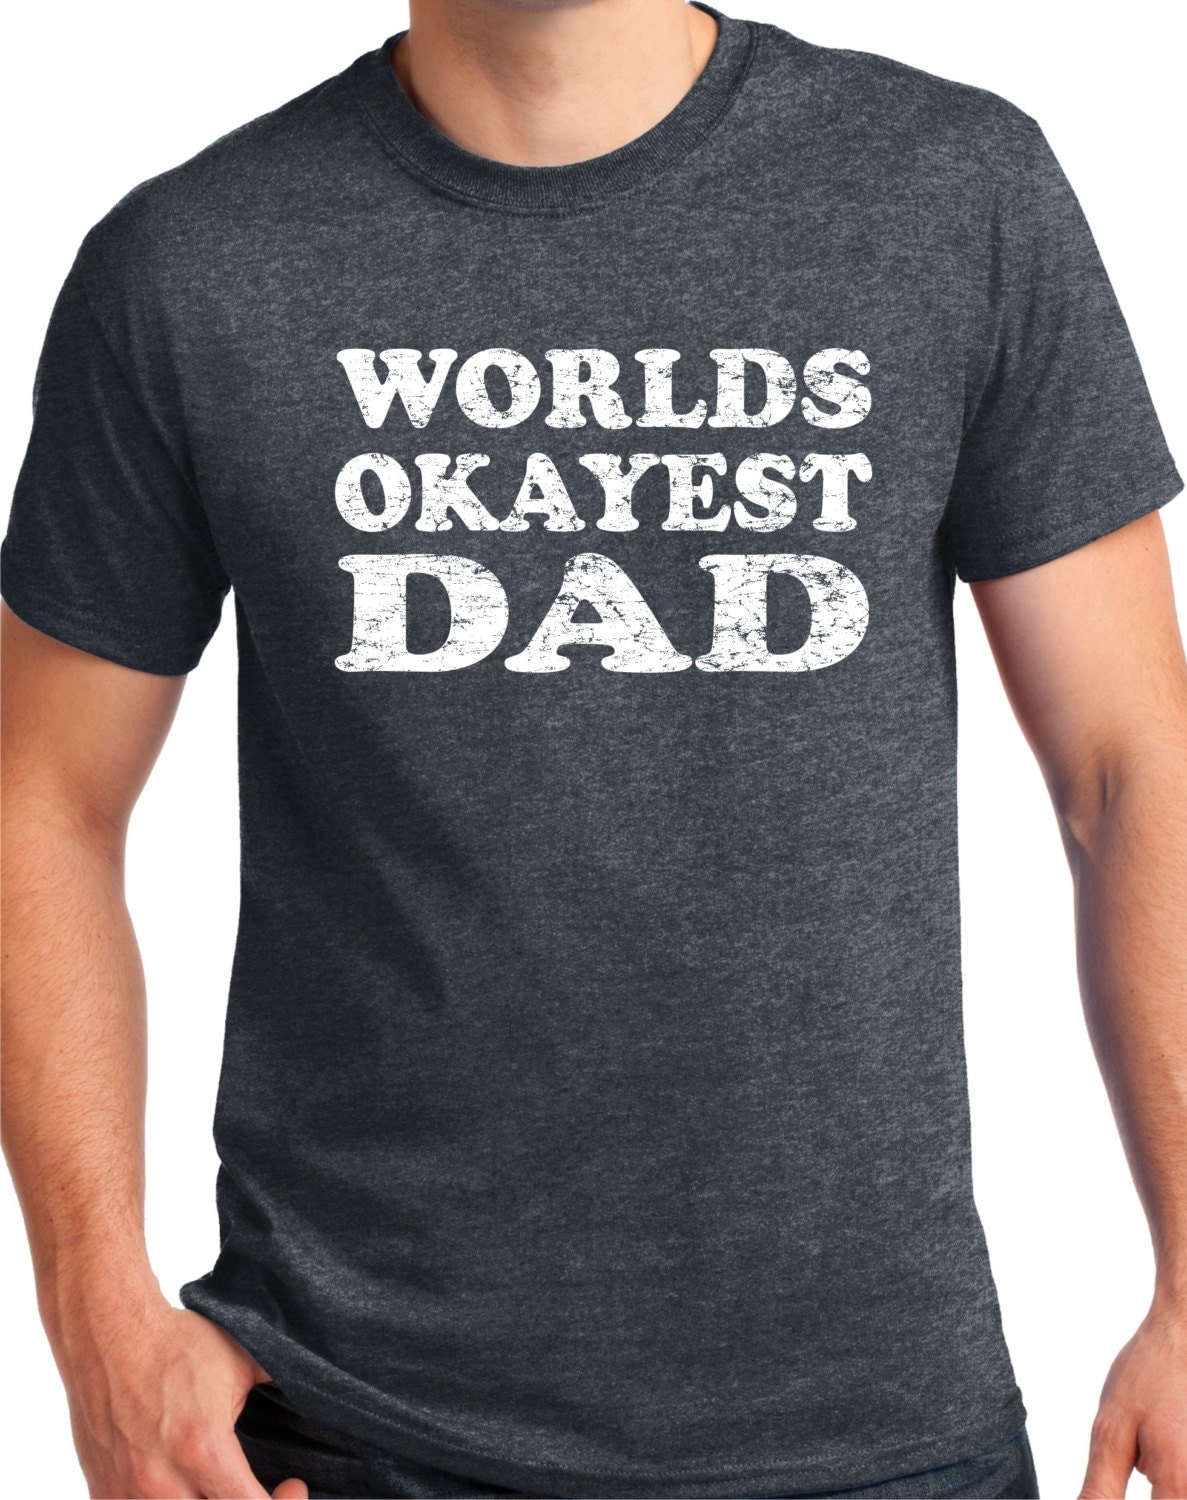 Worlds Okayest dad shirt Gift for Dad DAD SHIRT Fathers Day